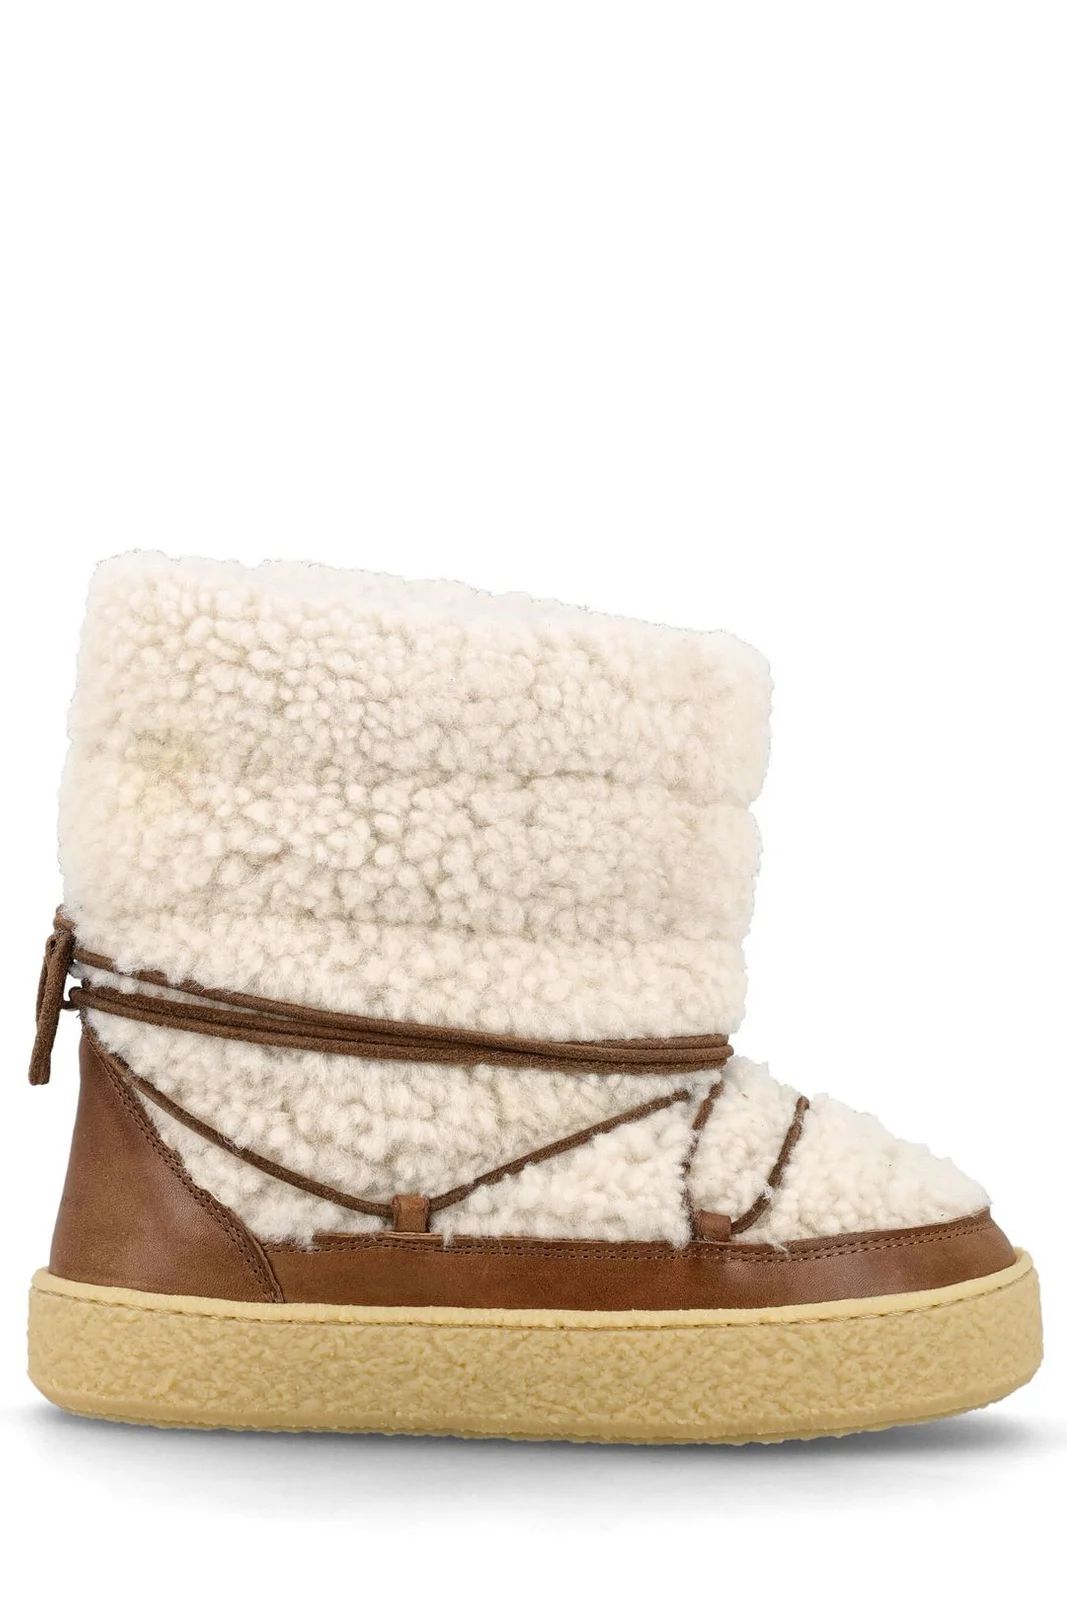 Isabel Marant Zimlee Lace-Up Snow Boots | Cettire Global